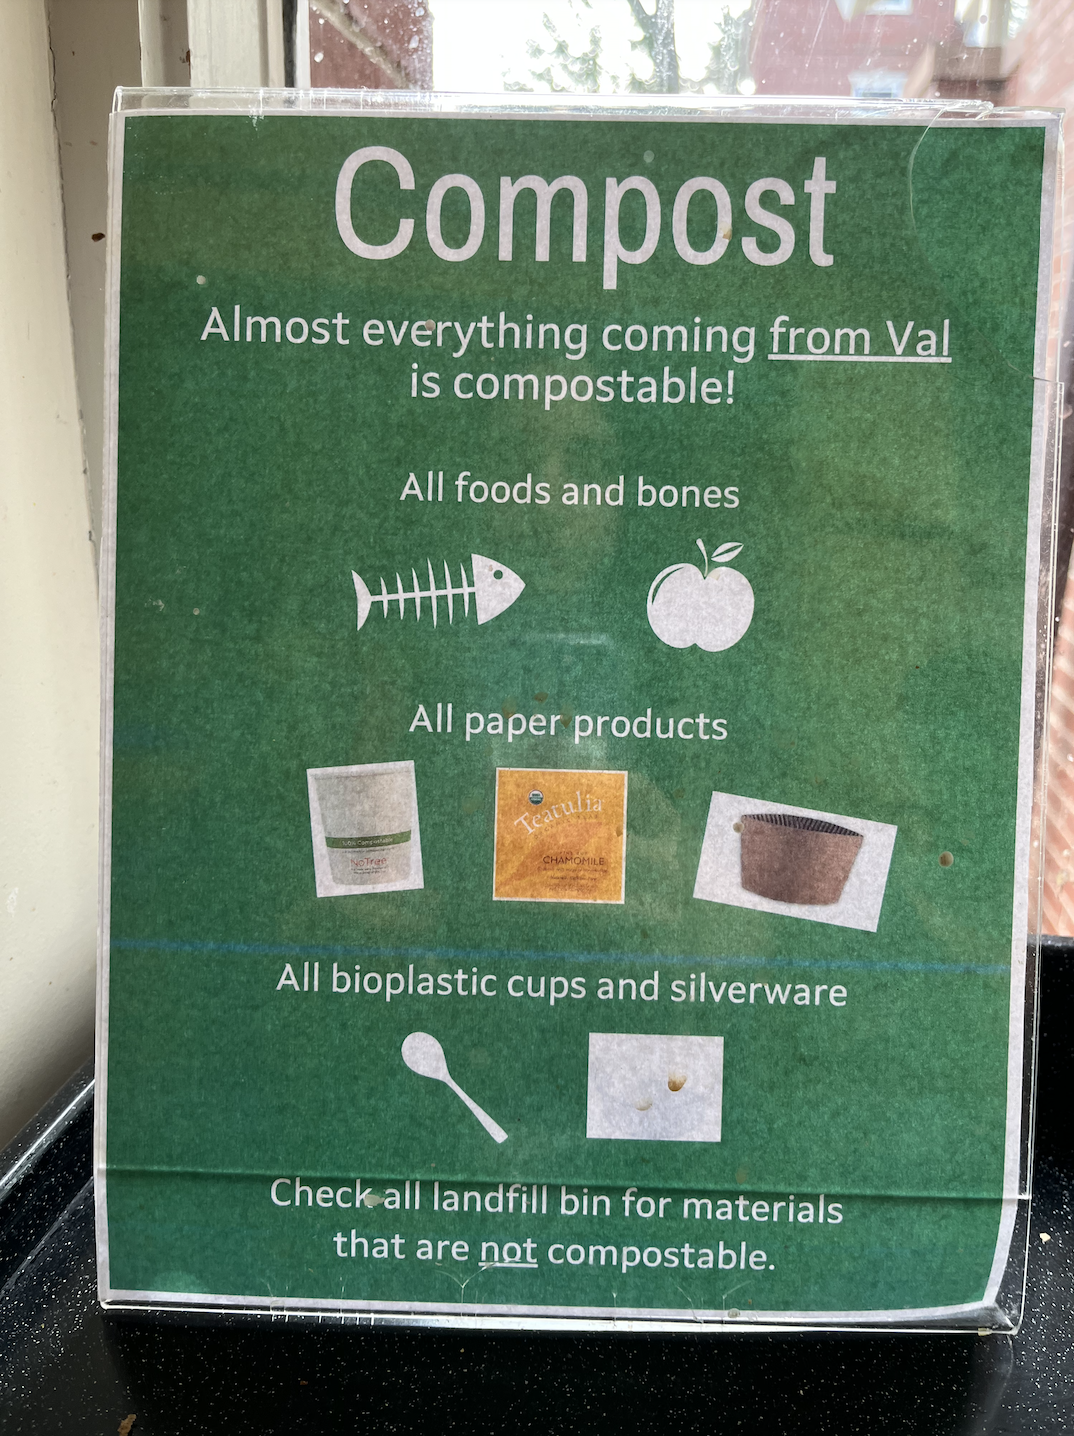 From Eggshells to Energy: Tracking the College’s Compost